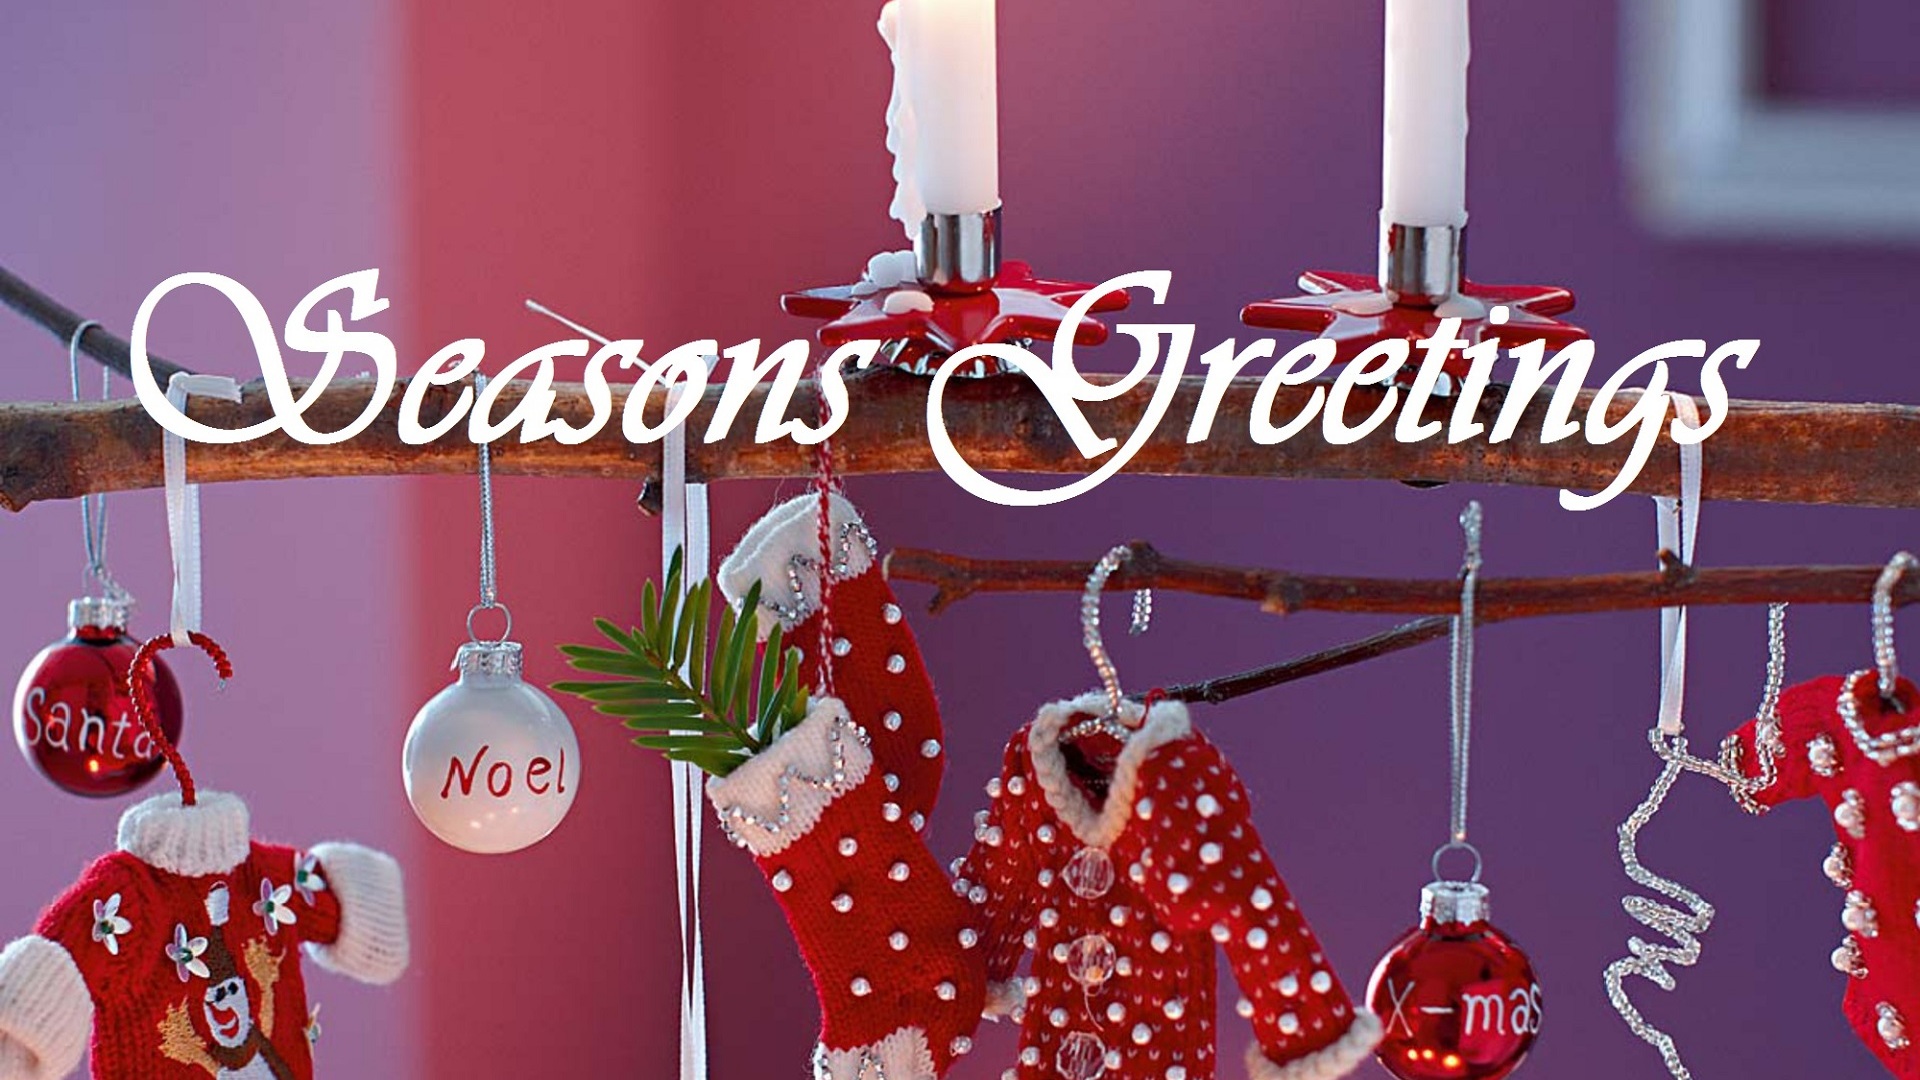 Best Wishes for the Season